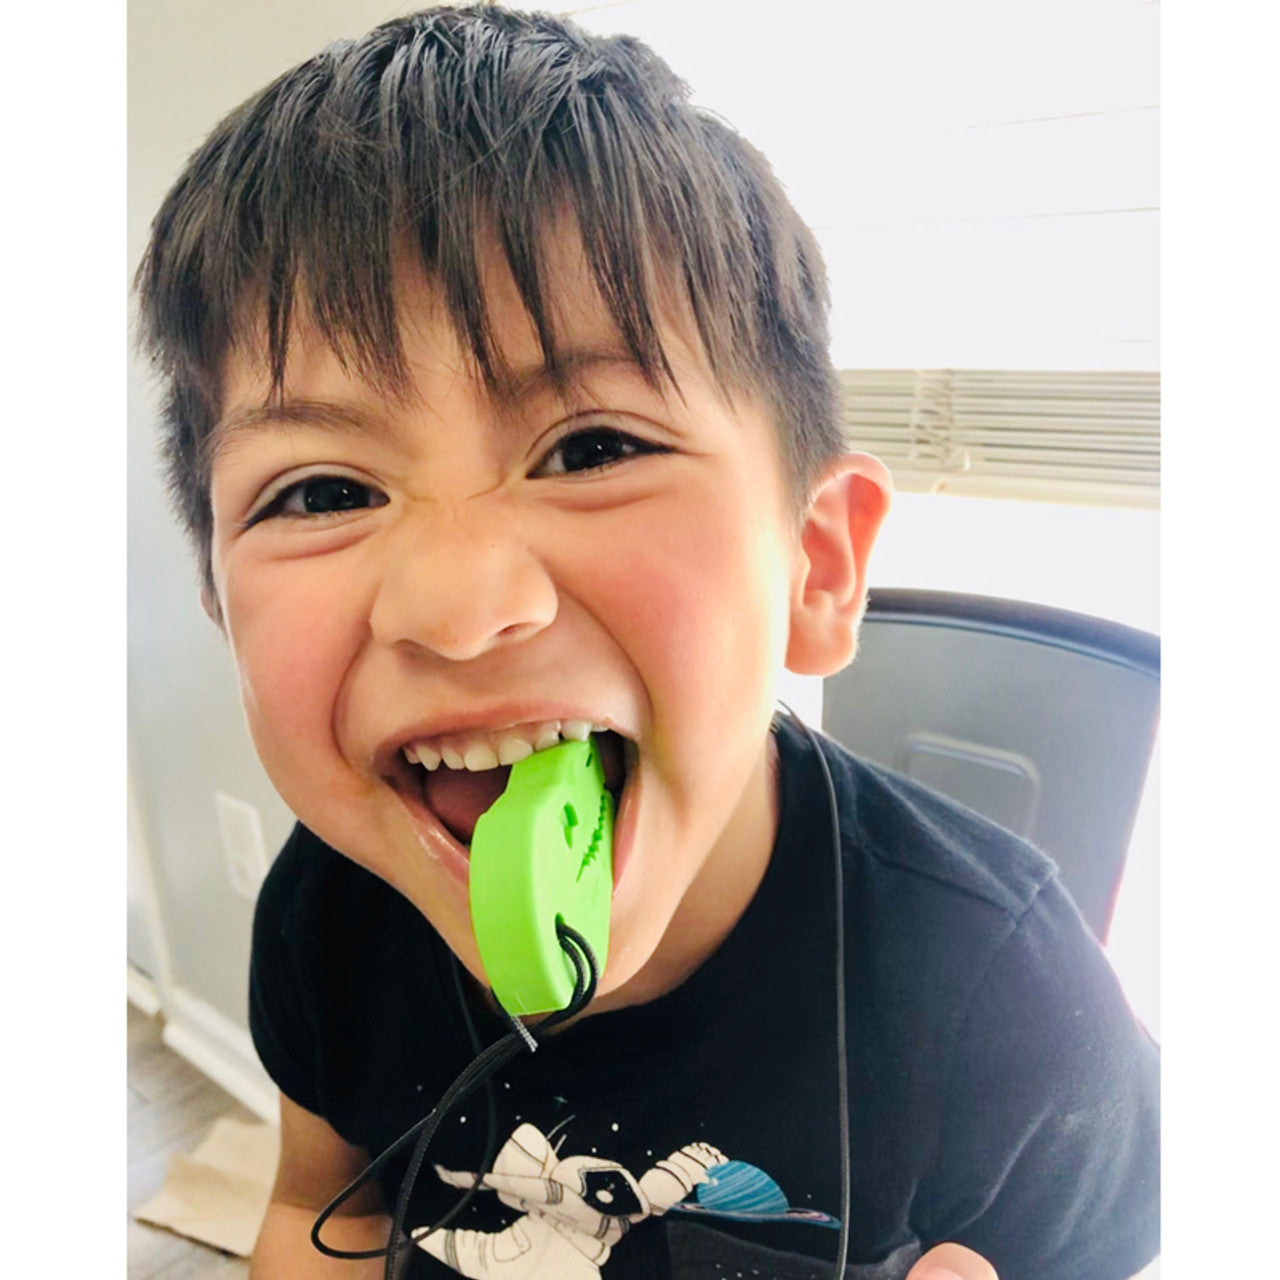 A child with medium light skin tone and short brown hair has the Lime Green XT Dino-Bite Chew Necklace pendant in their mouth. They are smiling while holding it in their teeth.